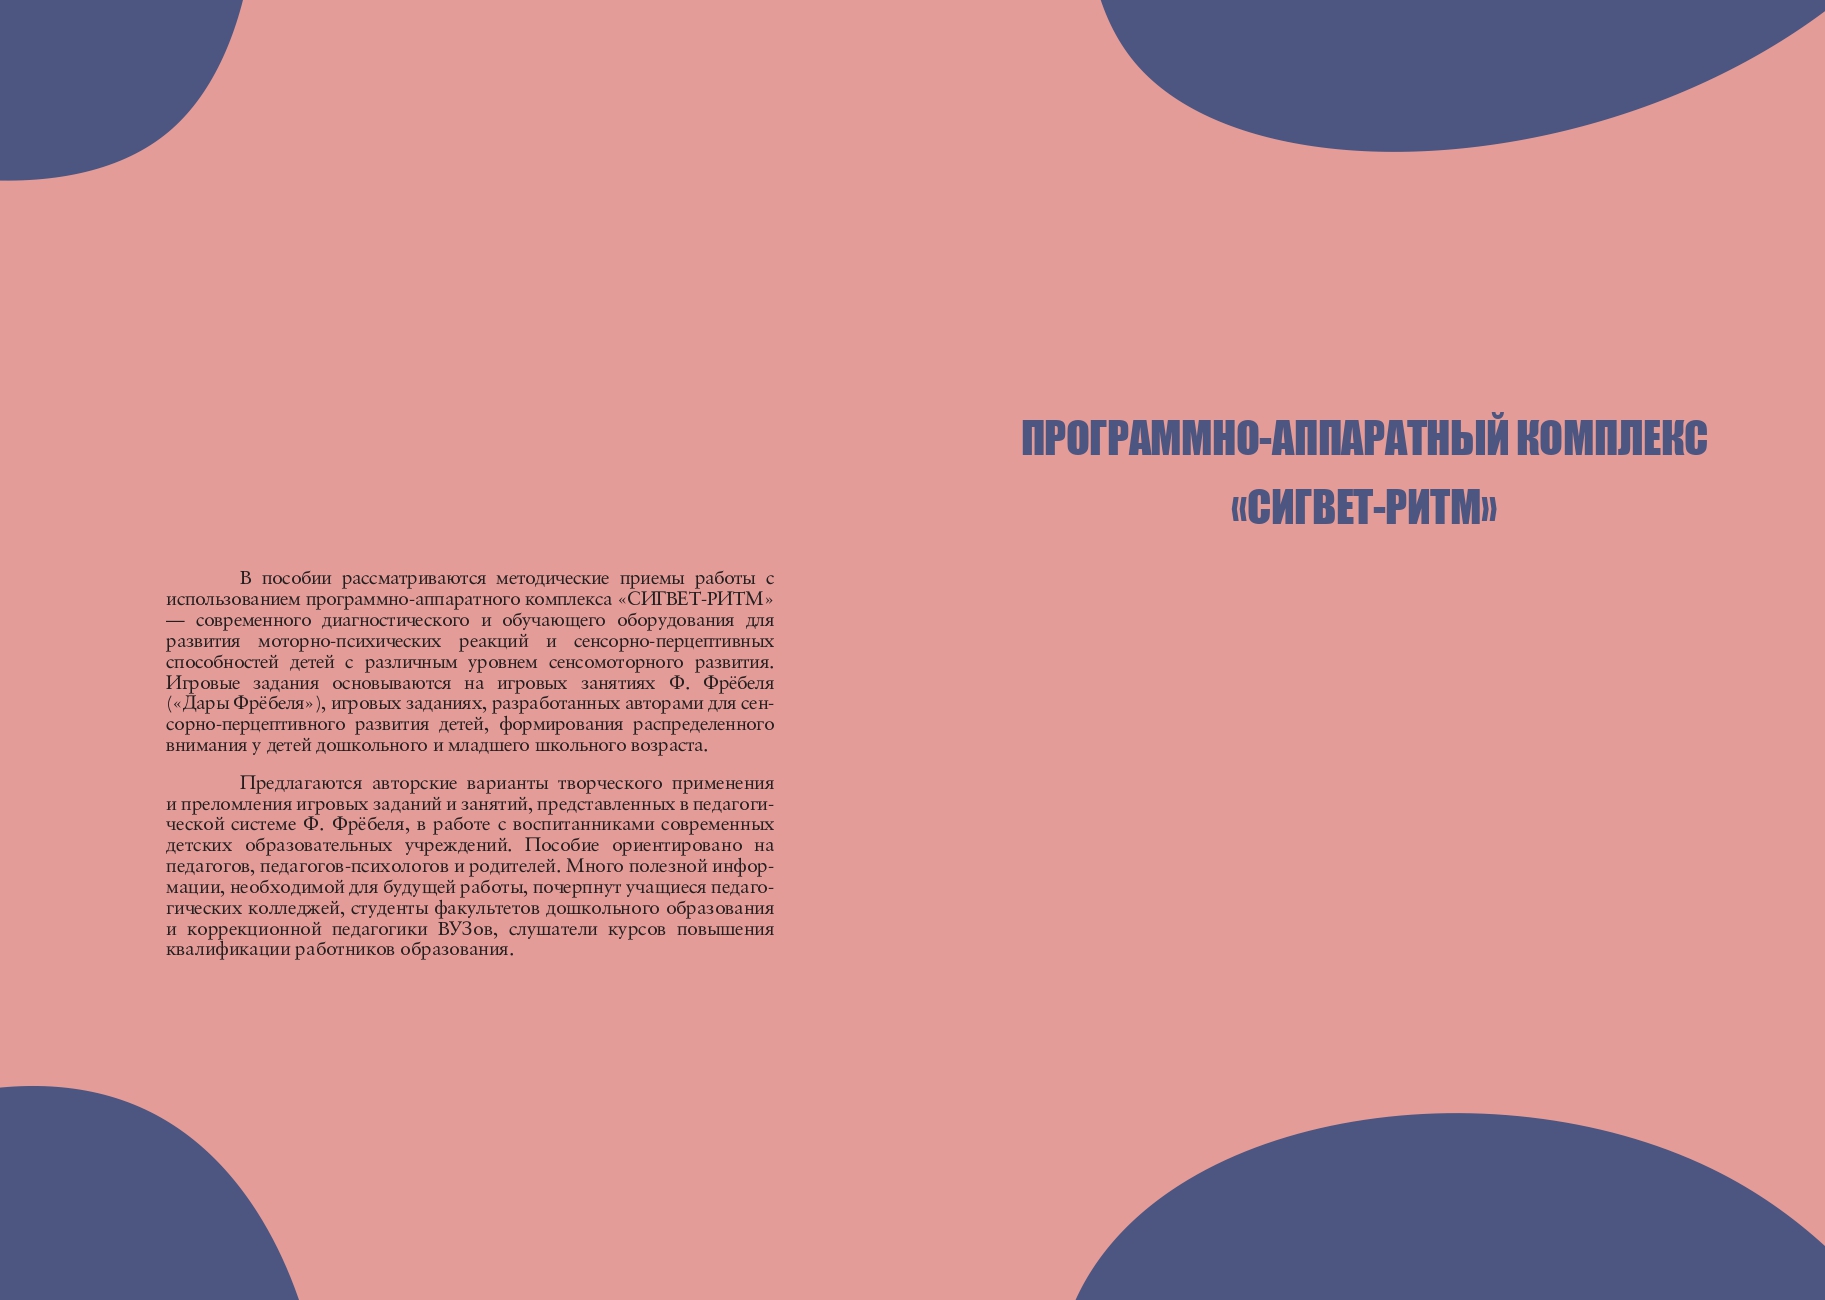 cover Сигвет page 0001